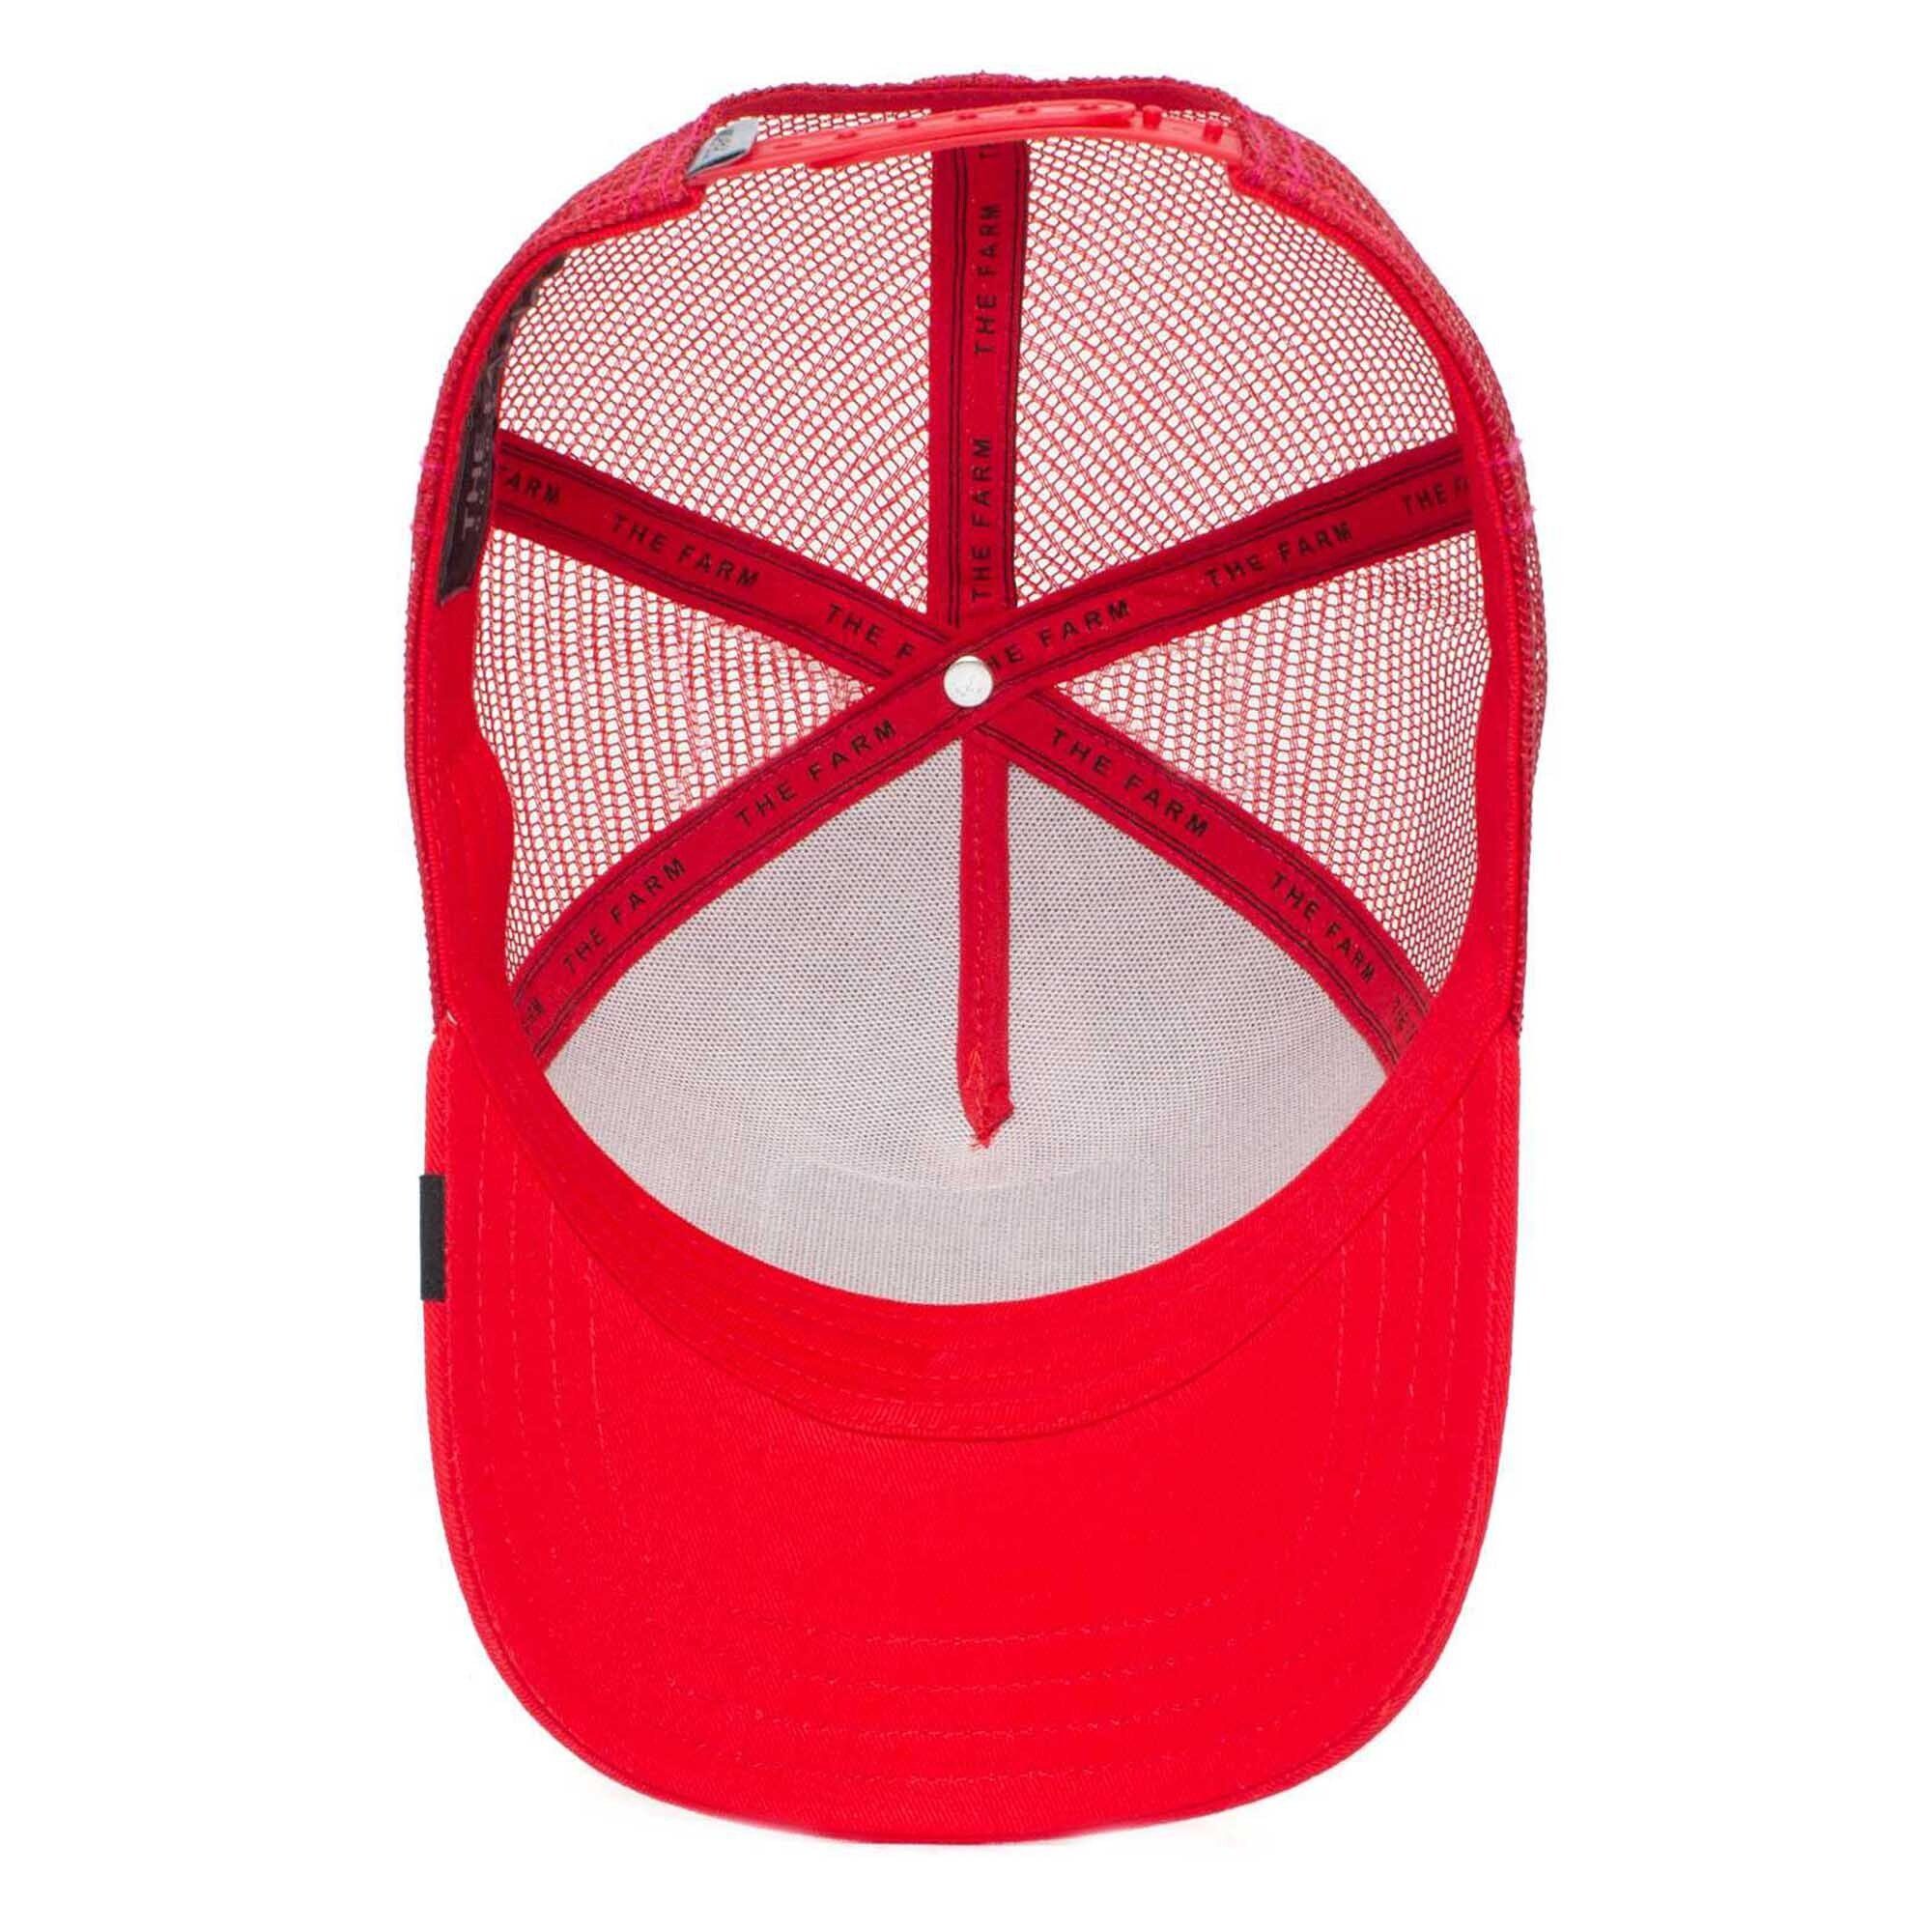 Bros. Kappe, GOORIN Size Cap Cock The red One Cap Baseball Unisex Trucker - Frontpatch,